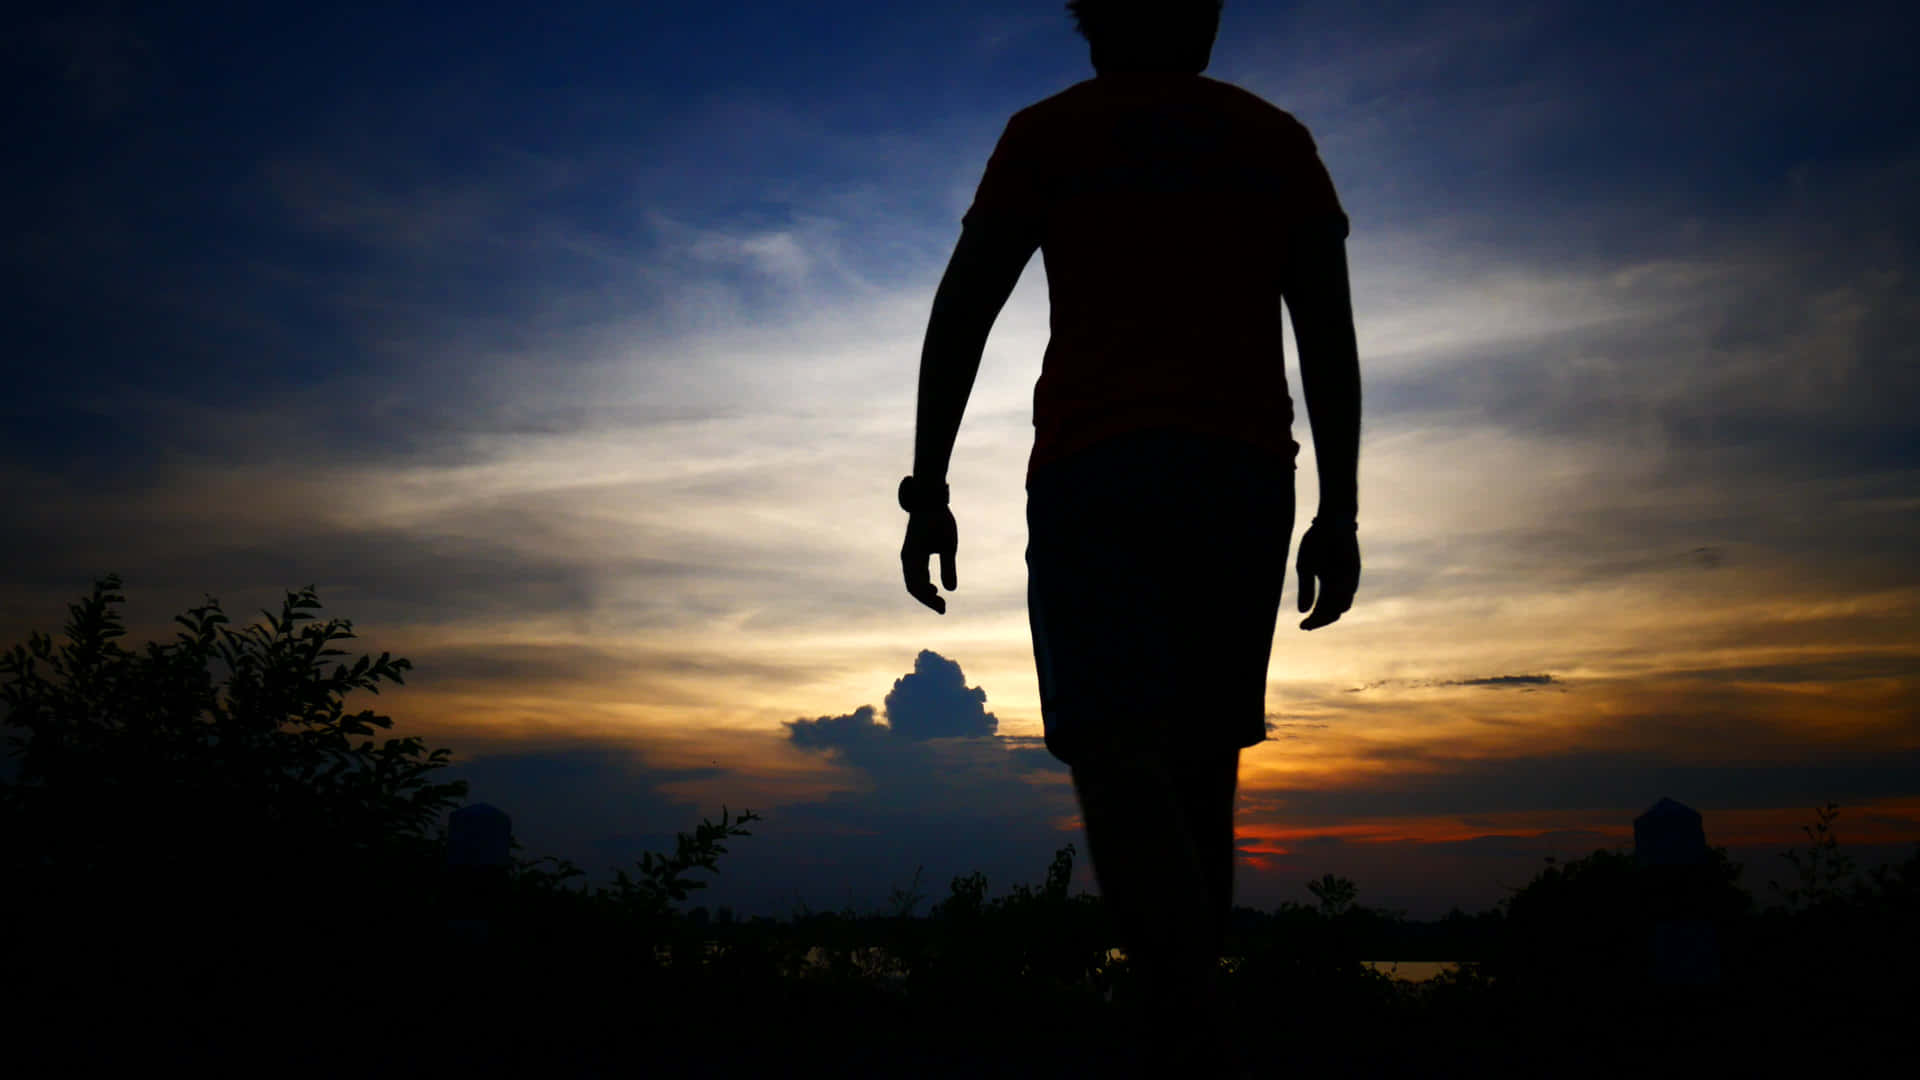 Silhouette Of A Man Walking In The Sunset